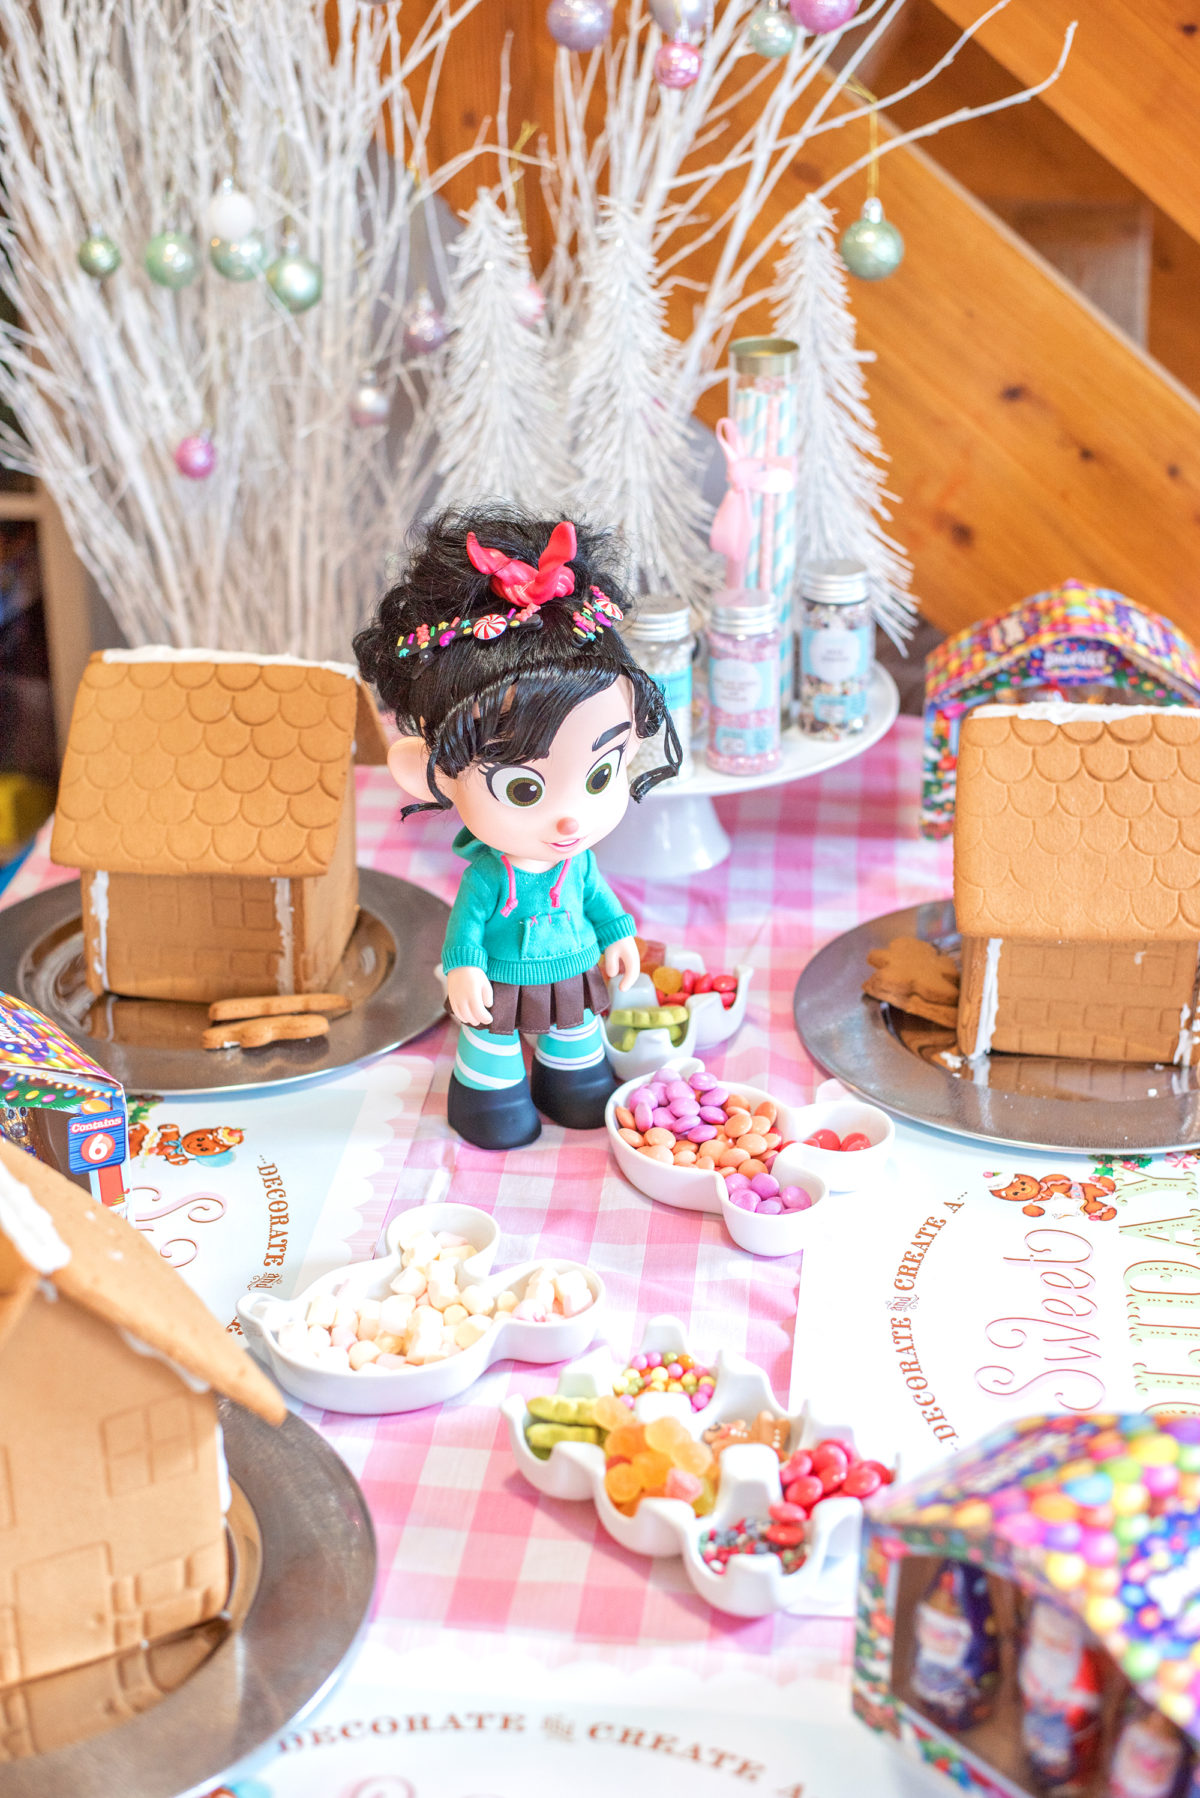 ShopDisney Wreck it Ralph toys Gingerbread party